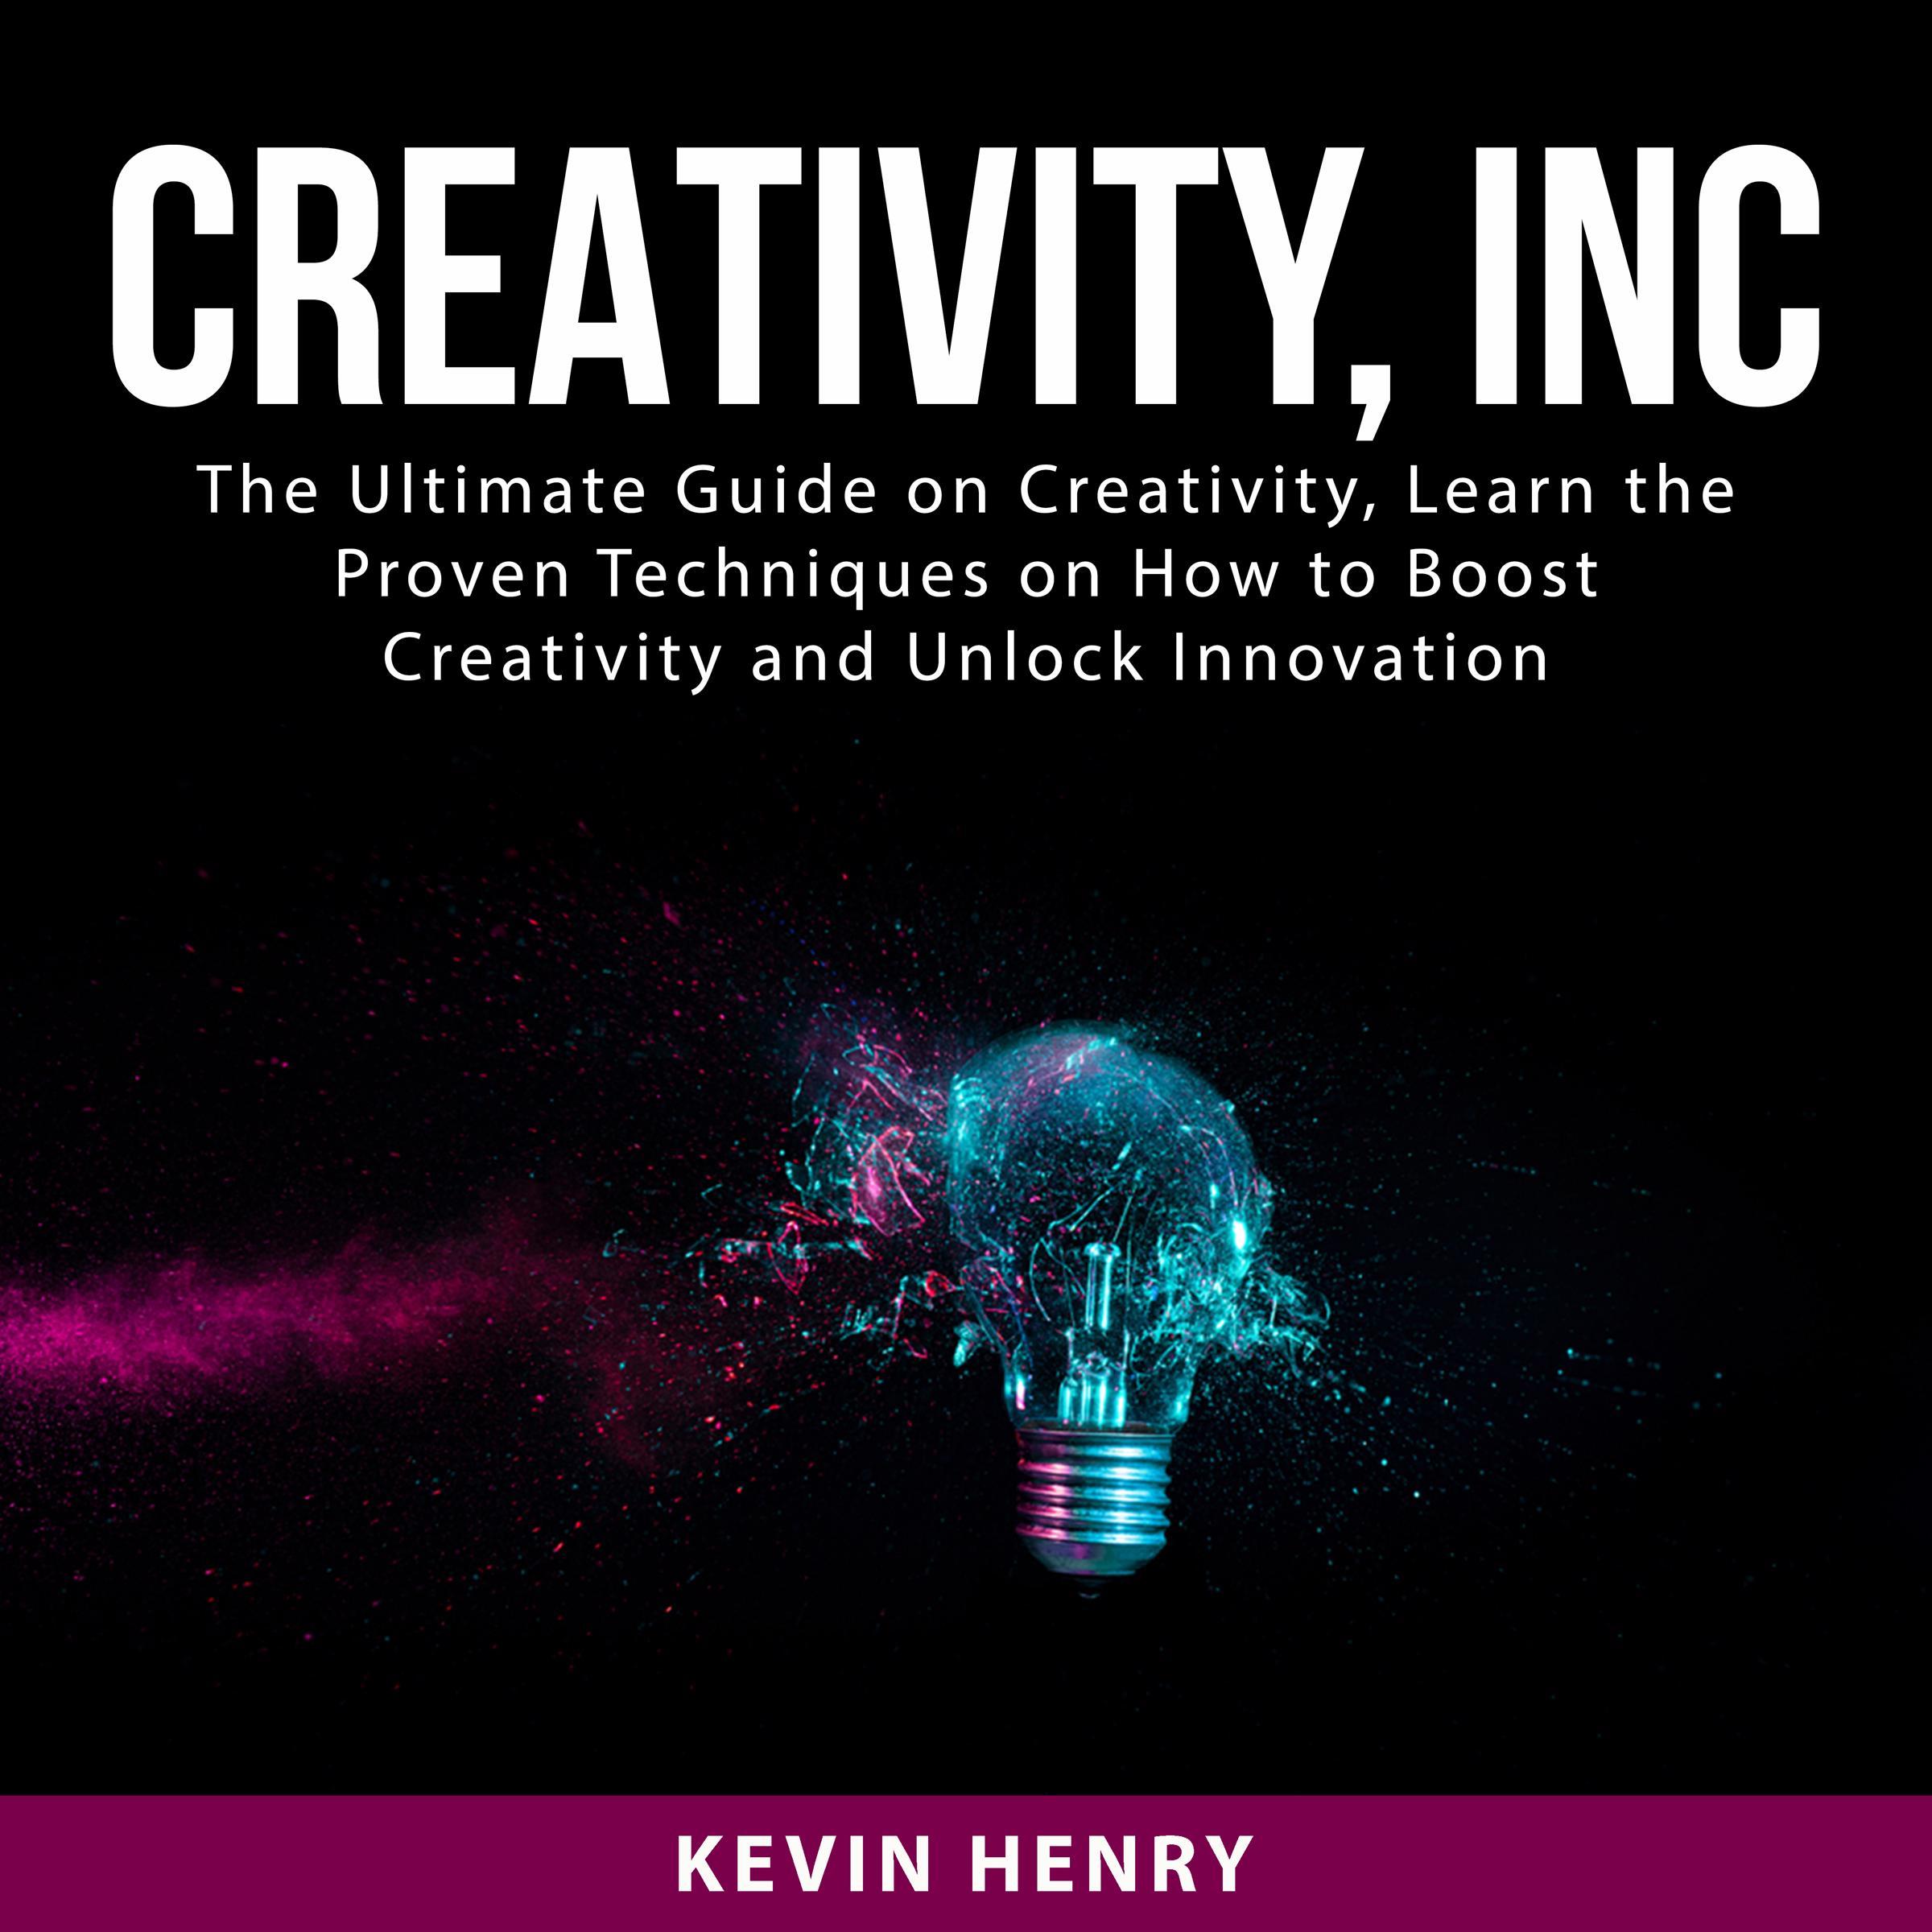 Creativity, Inc: The Ultimate Guide on Creativity, Learn the Proven Techniques on How to Boost Creativity and Unlock Innovation